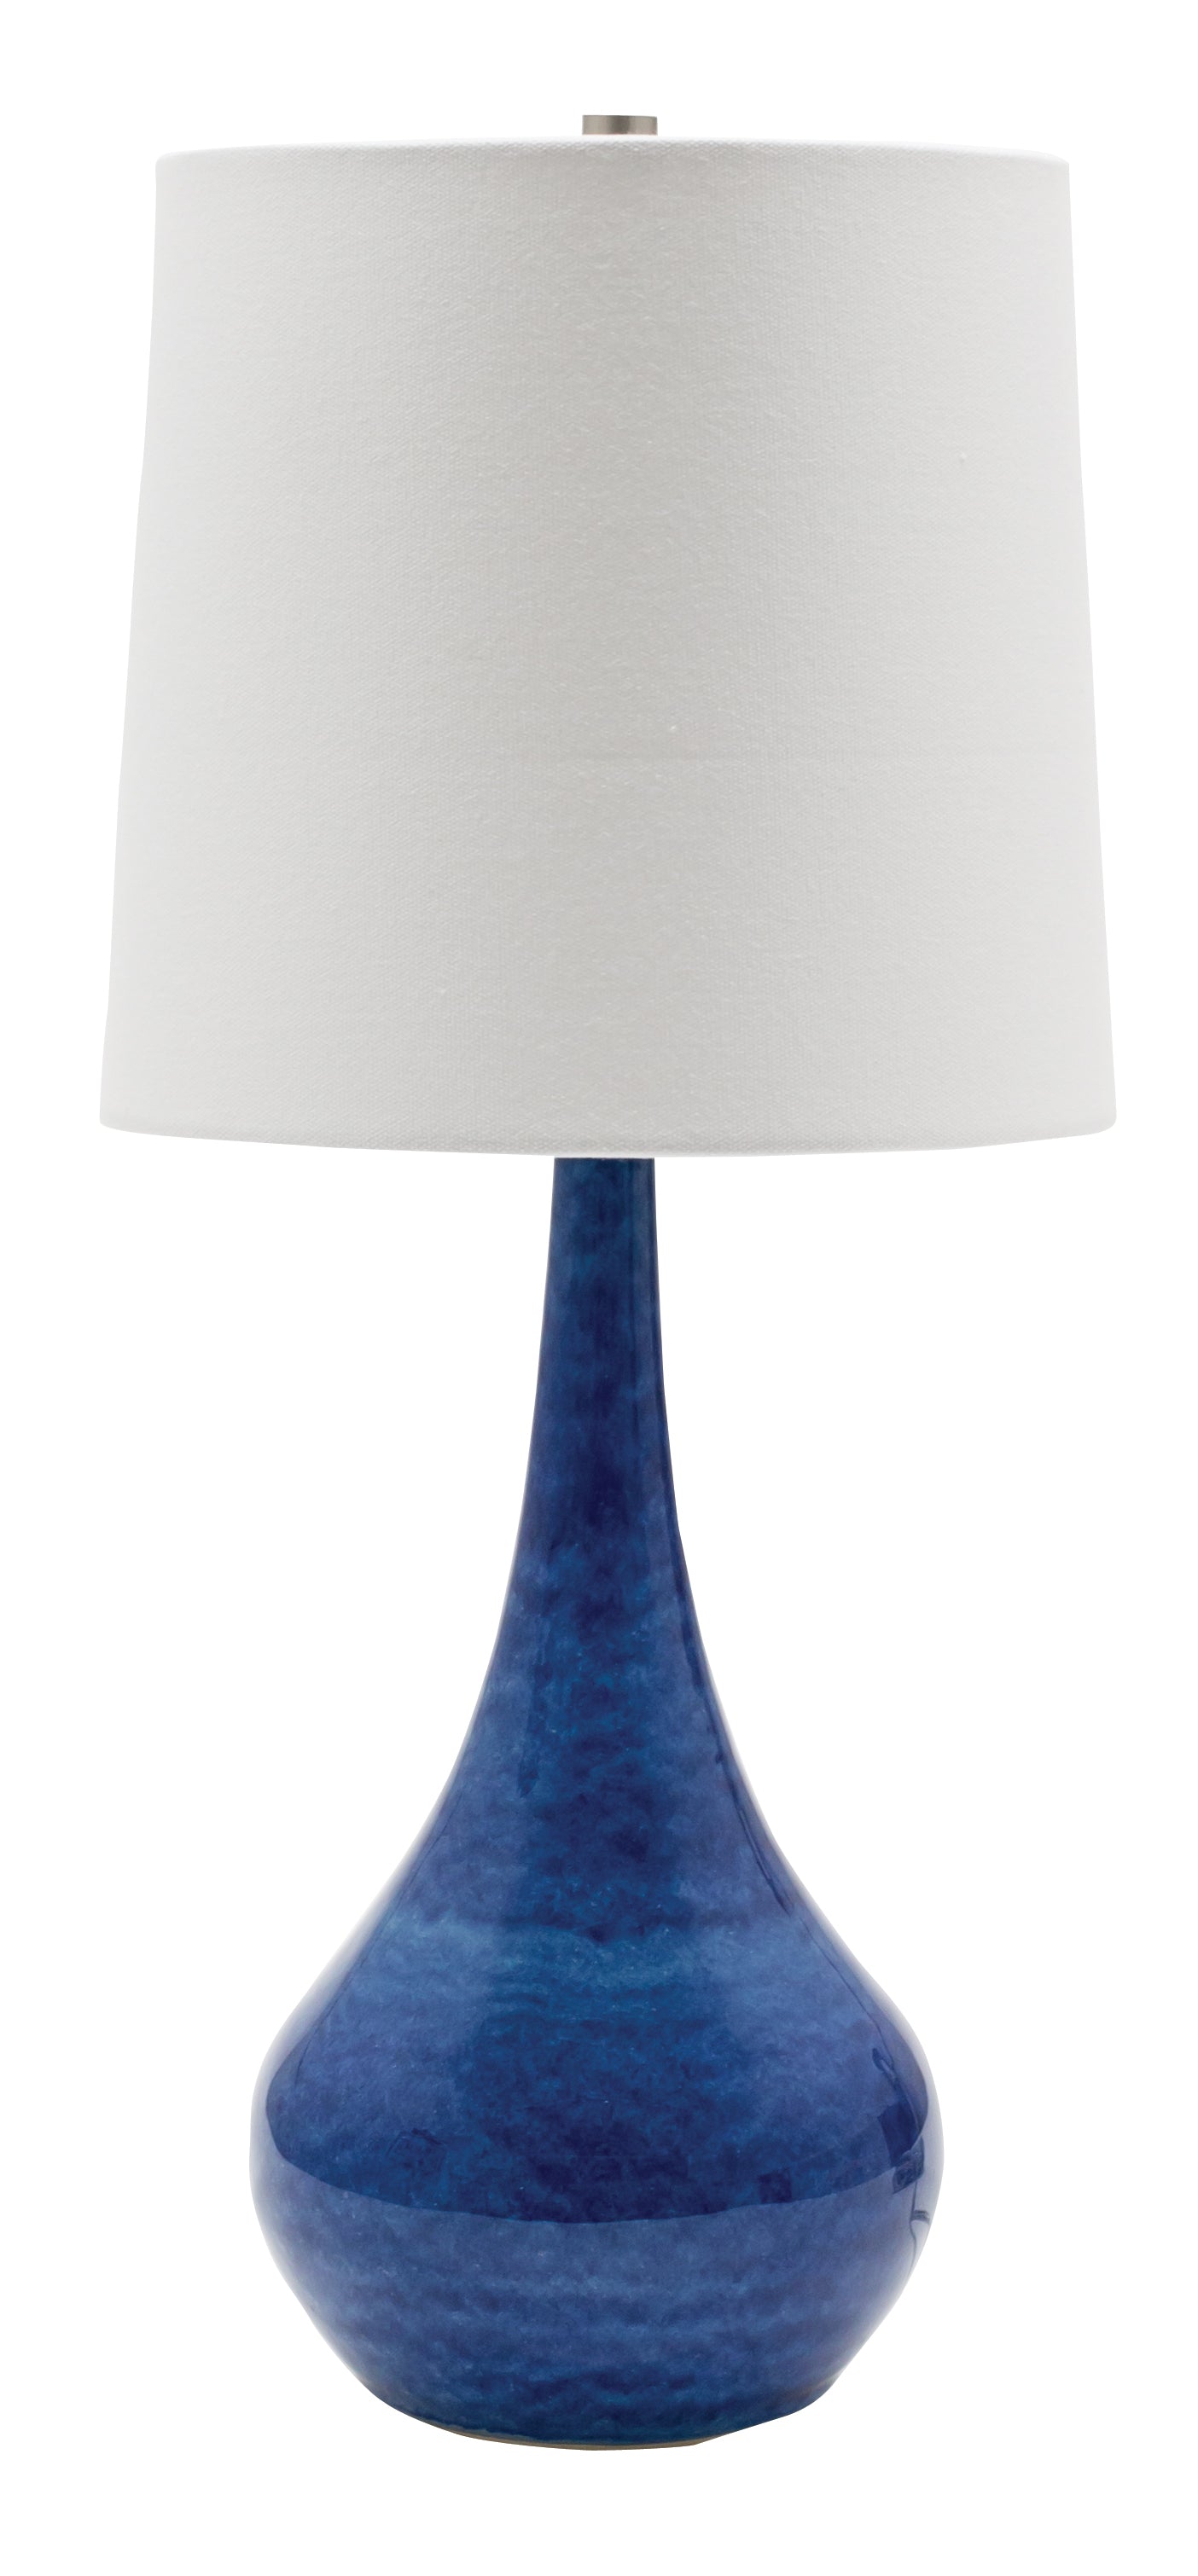 House of Troy Scatchard 22.5" Stoneware Table Lamp in Blue Gloss GS180-BG